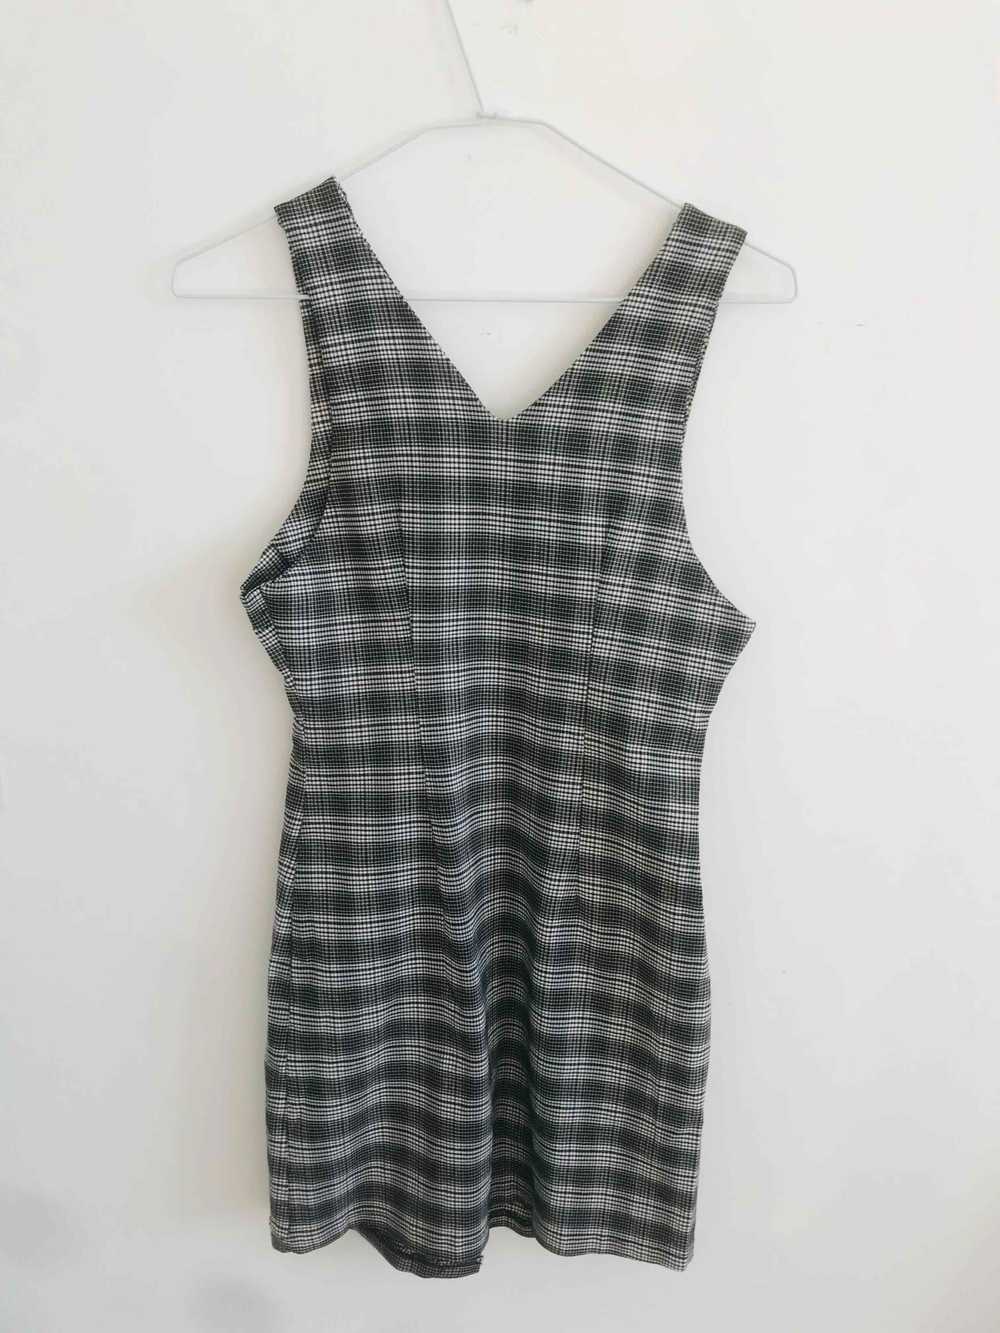 Buttoned dress - Checked mini dress - image 2